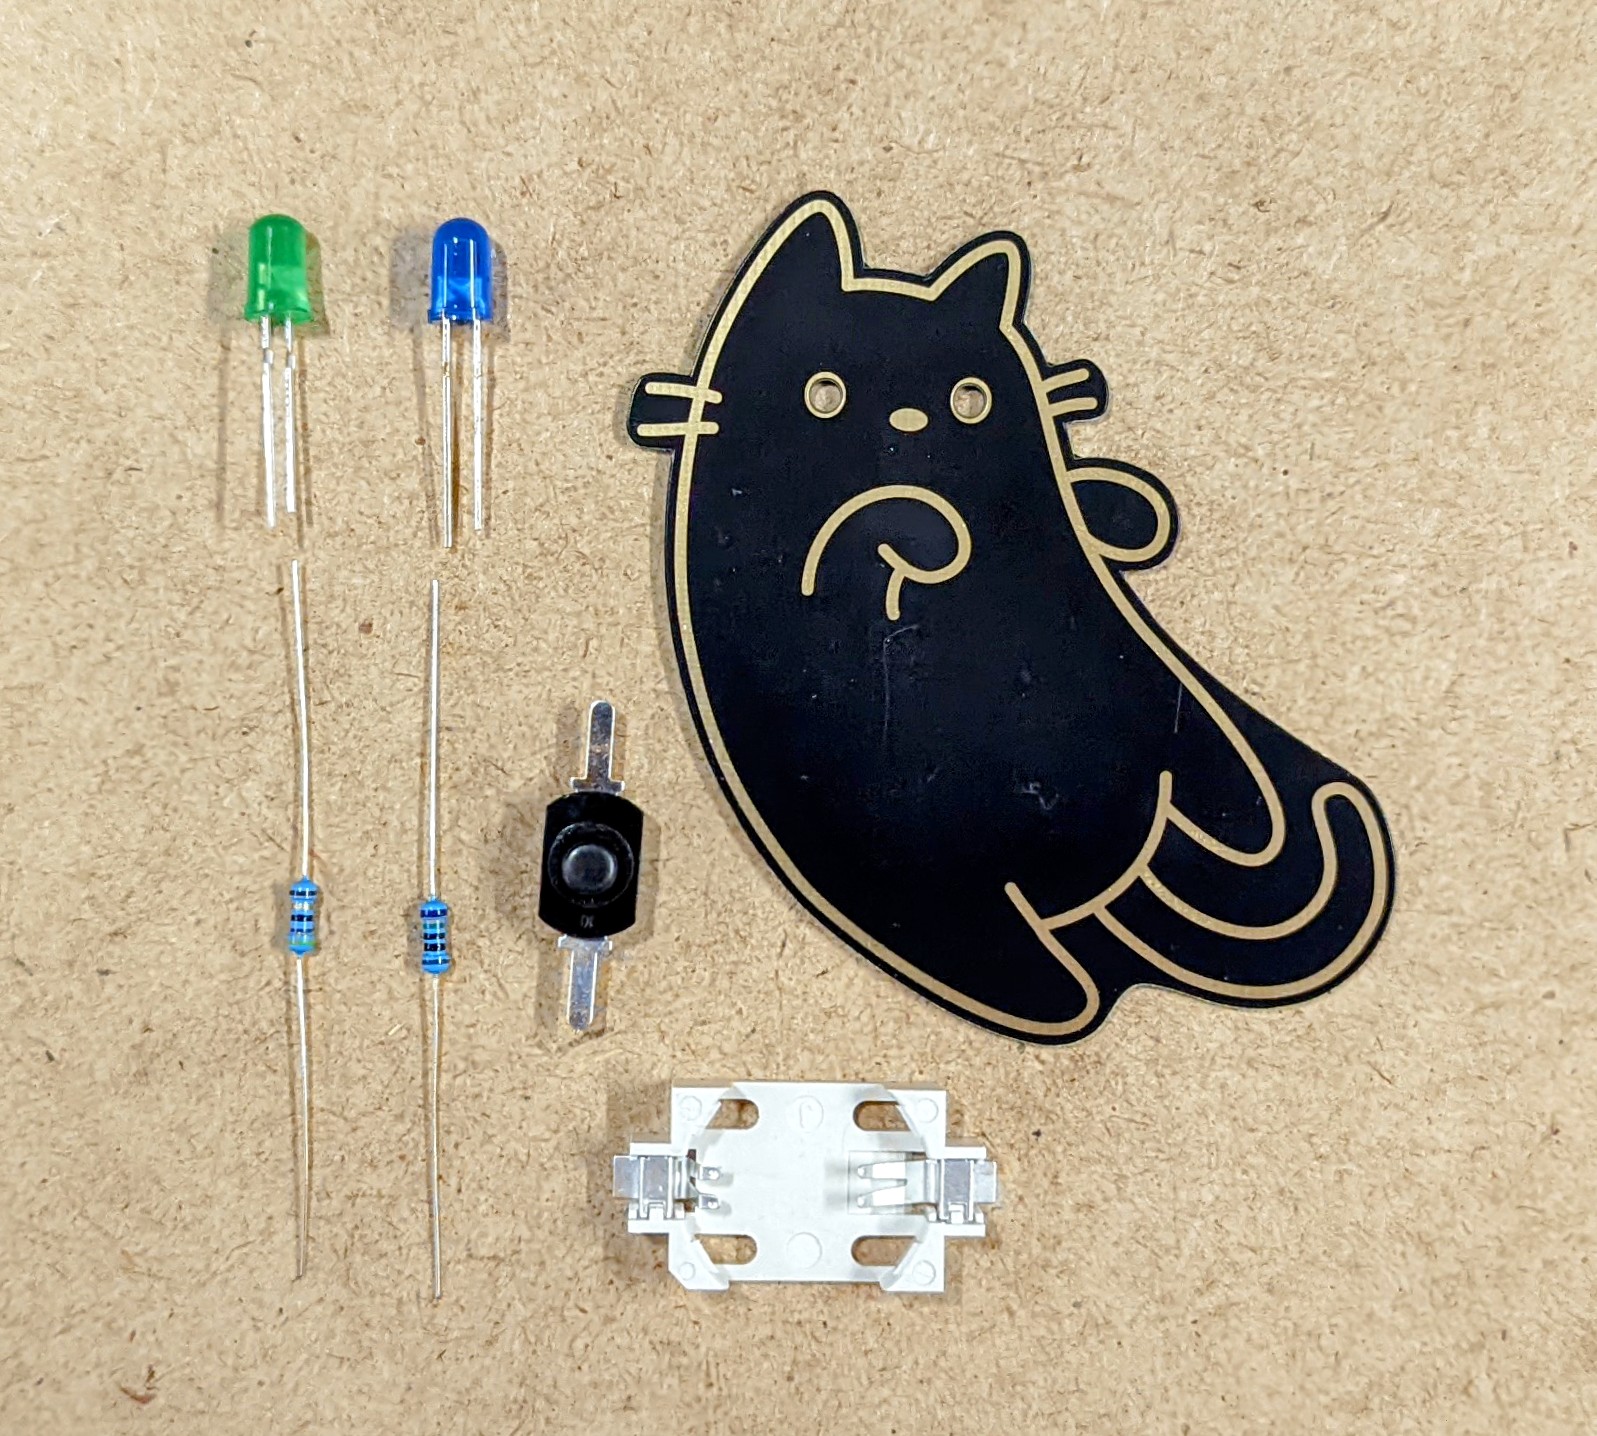 MINT-Labs Rocket - A soldering kit out of this world